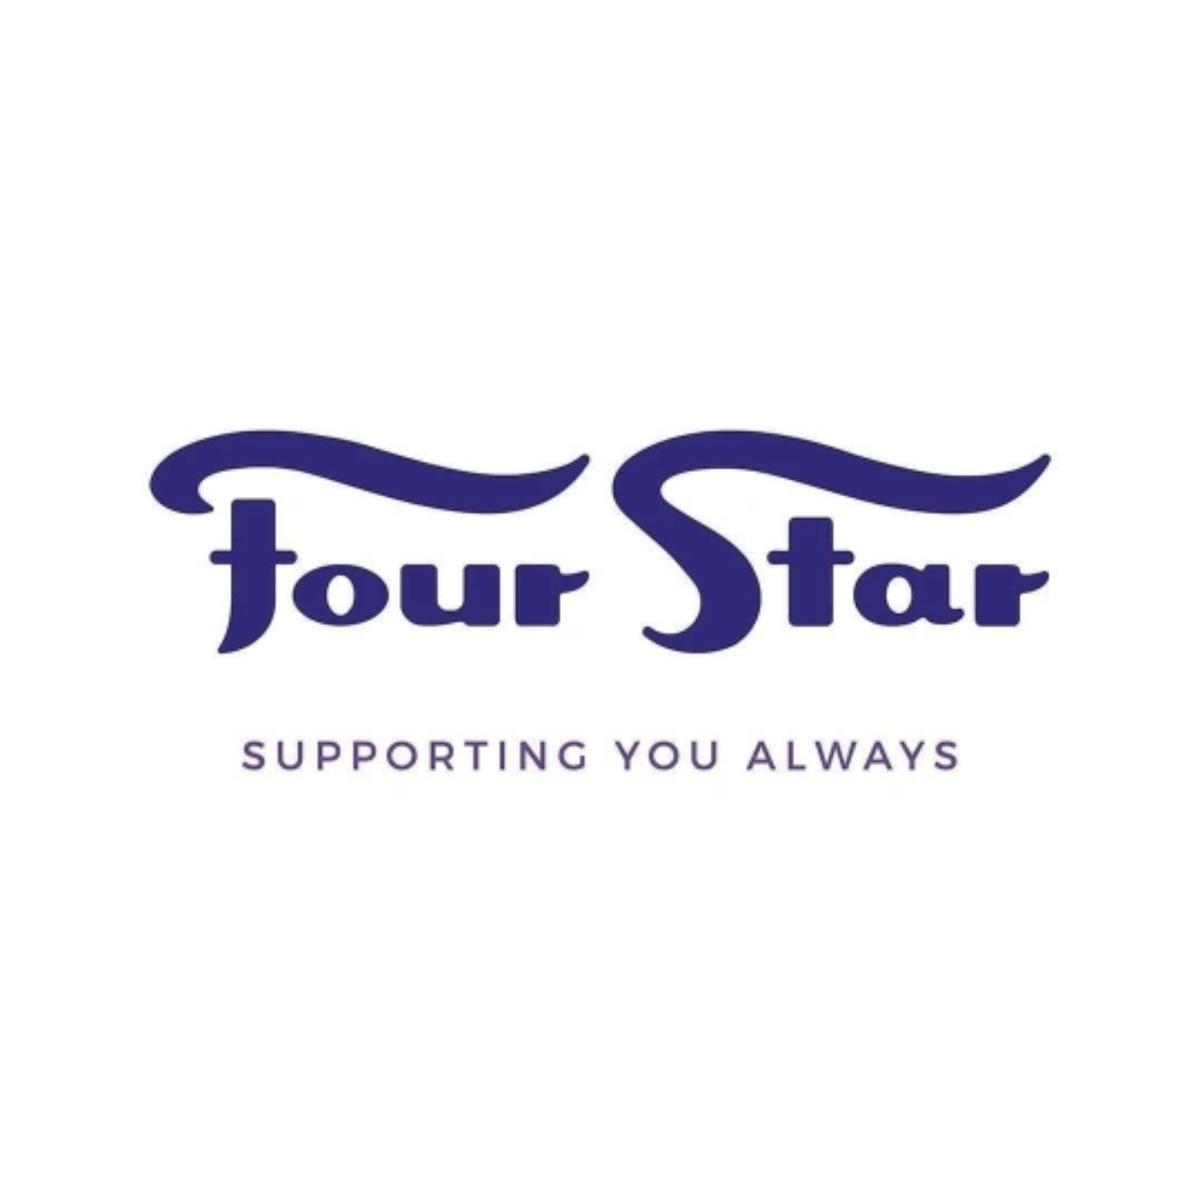 Four Star's images